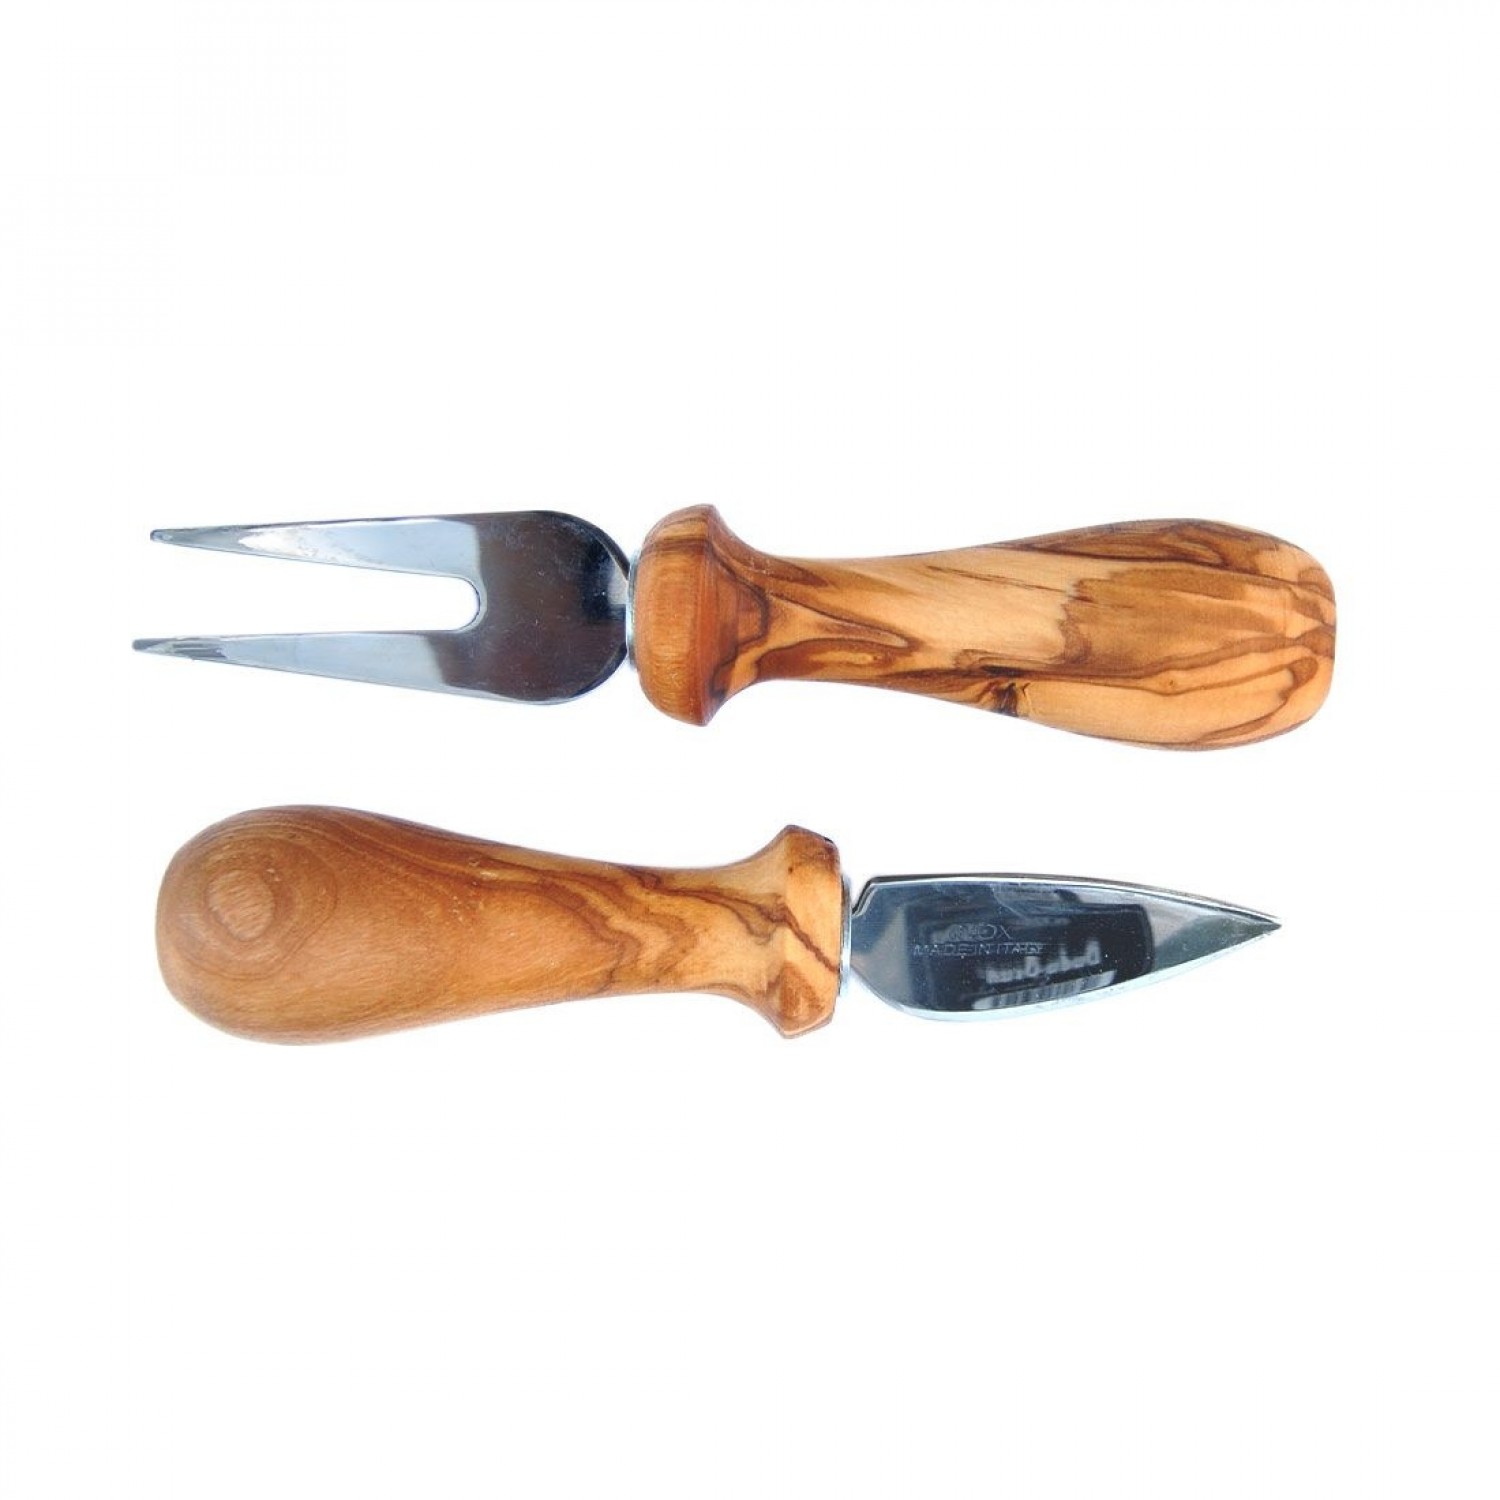 Cheese Cutlery of Olive Wood, 2-pieces | Olivenholz erleben